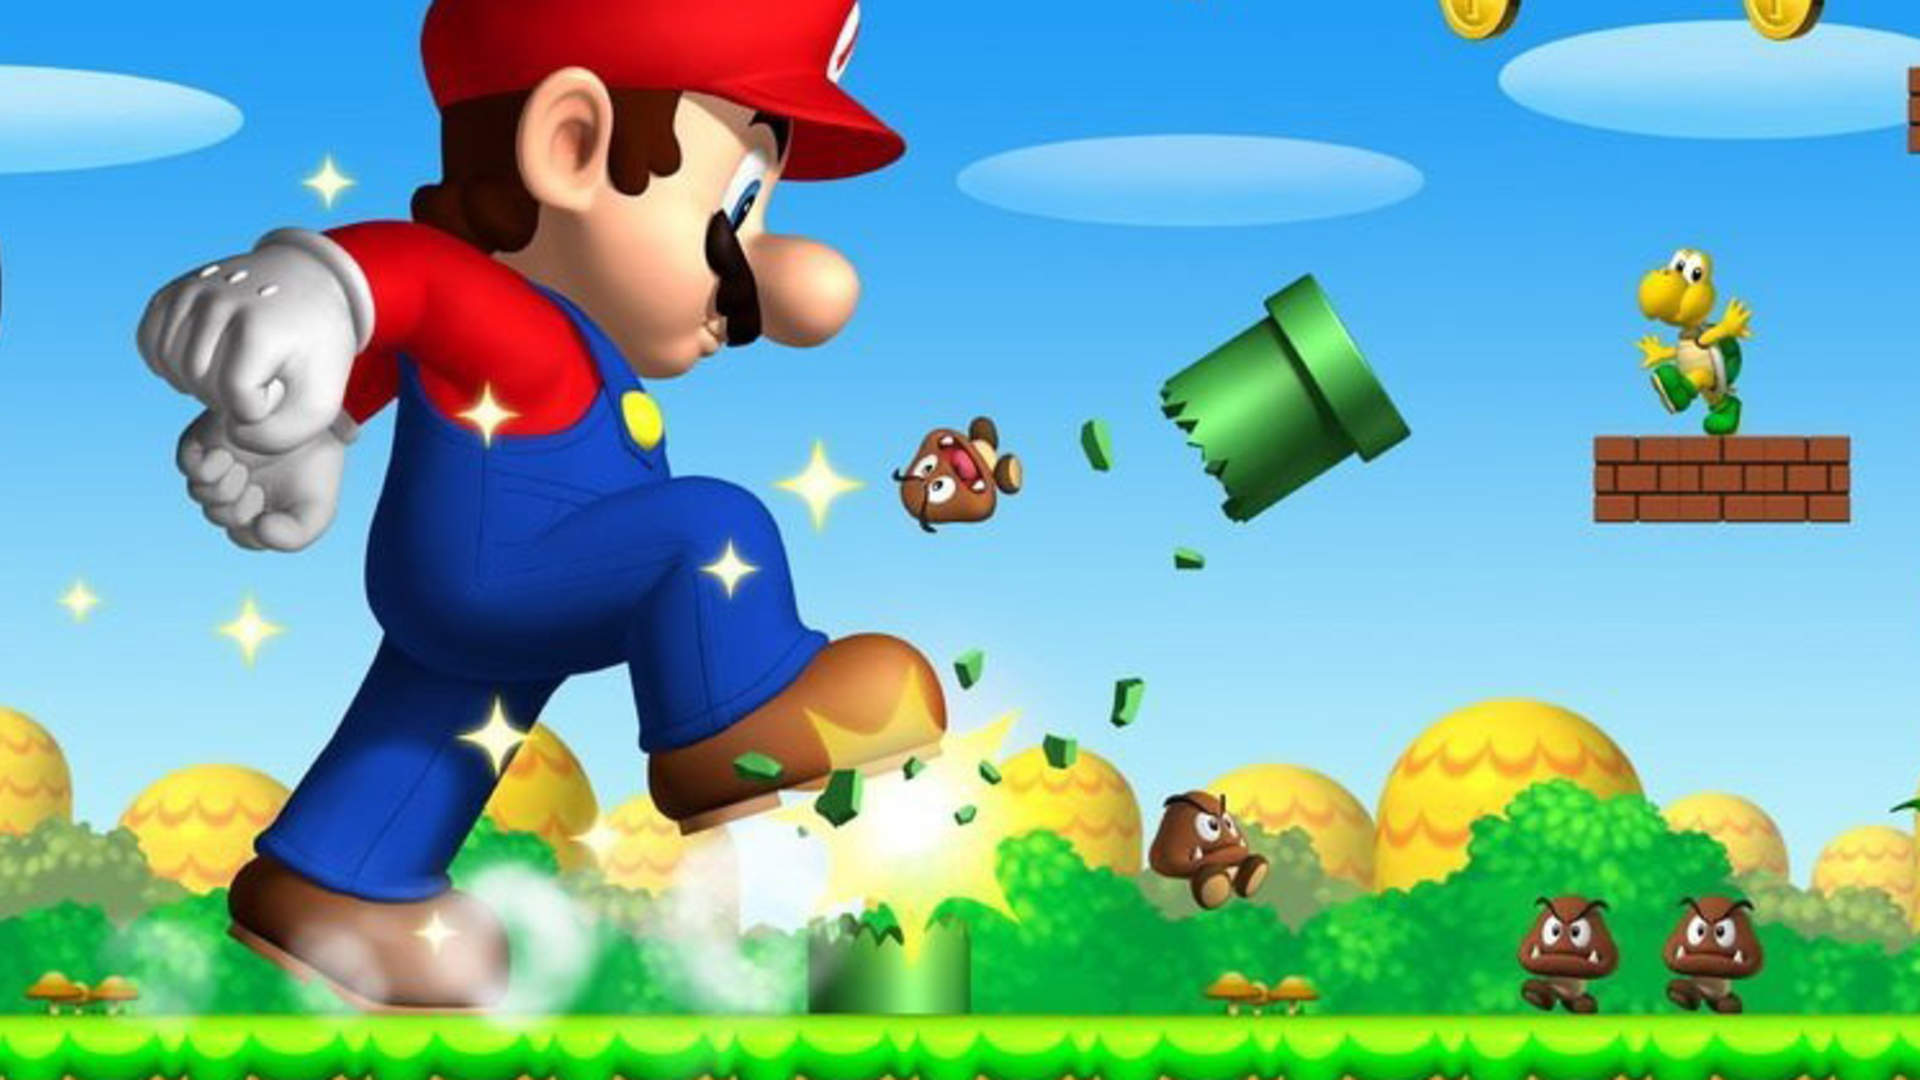 A scene from a Mario game